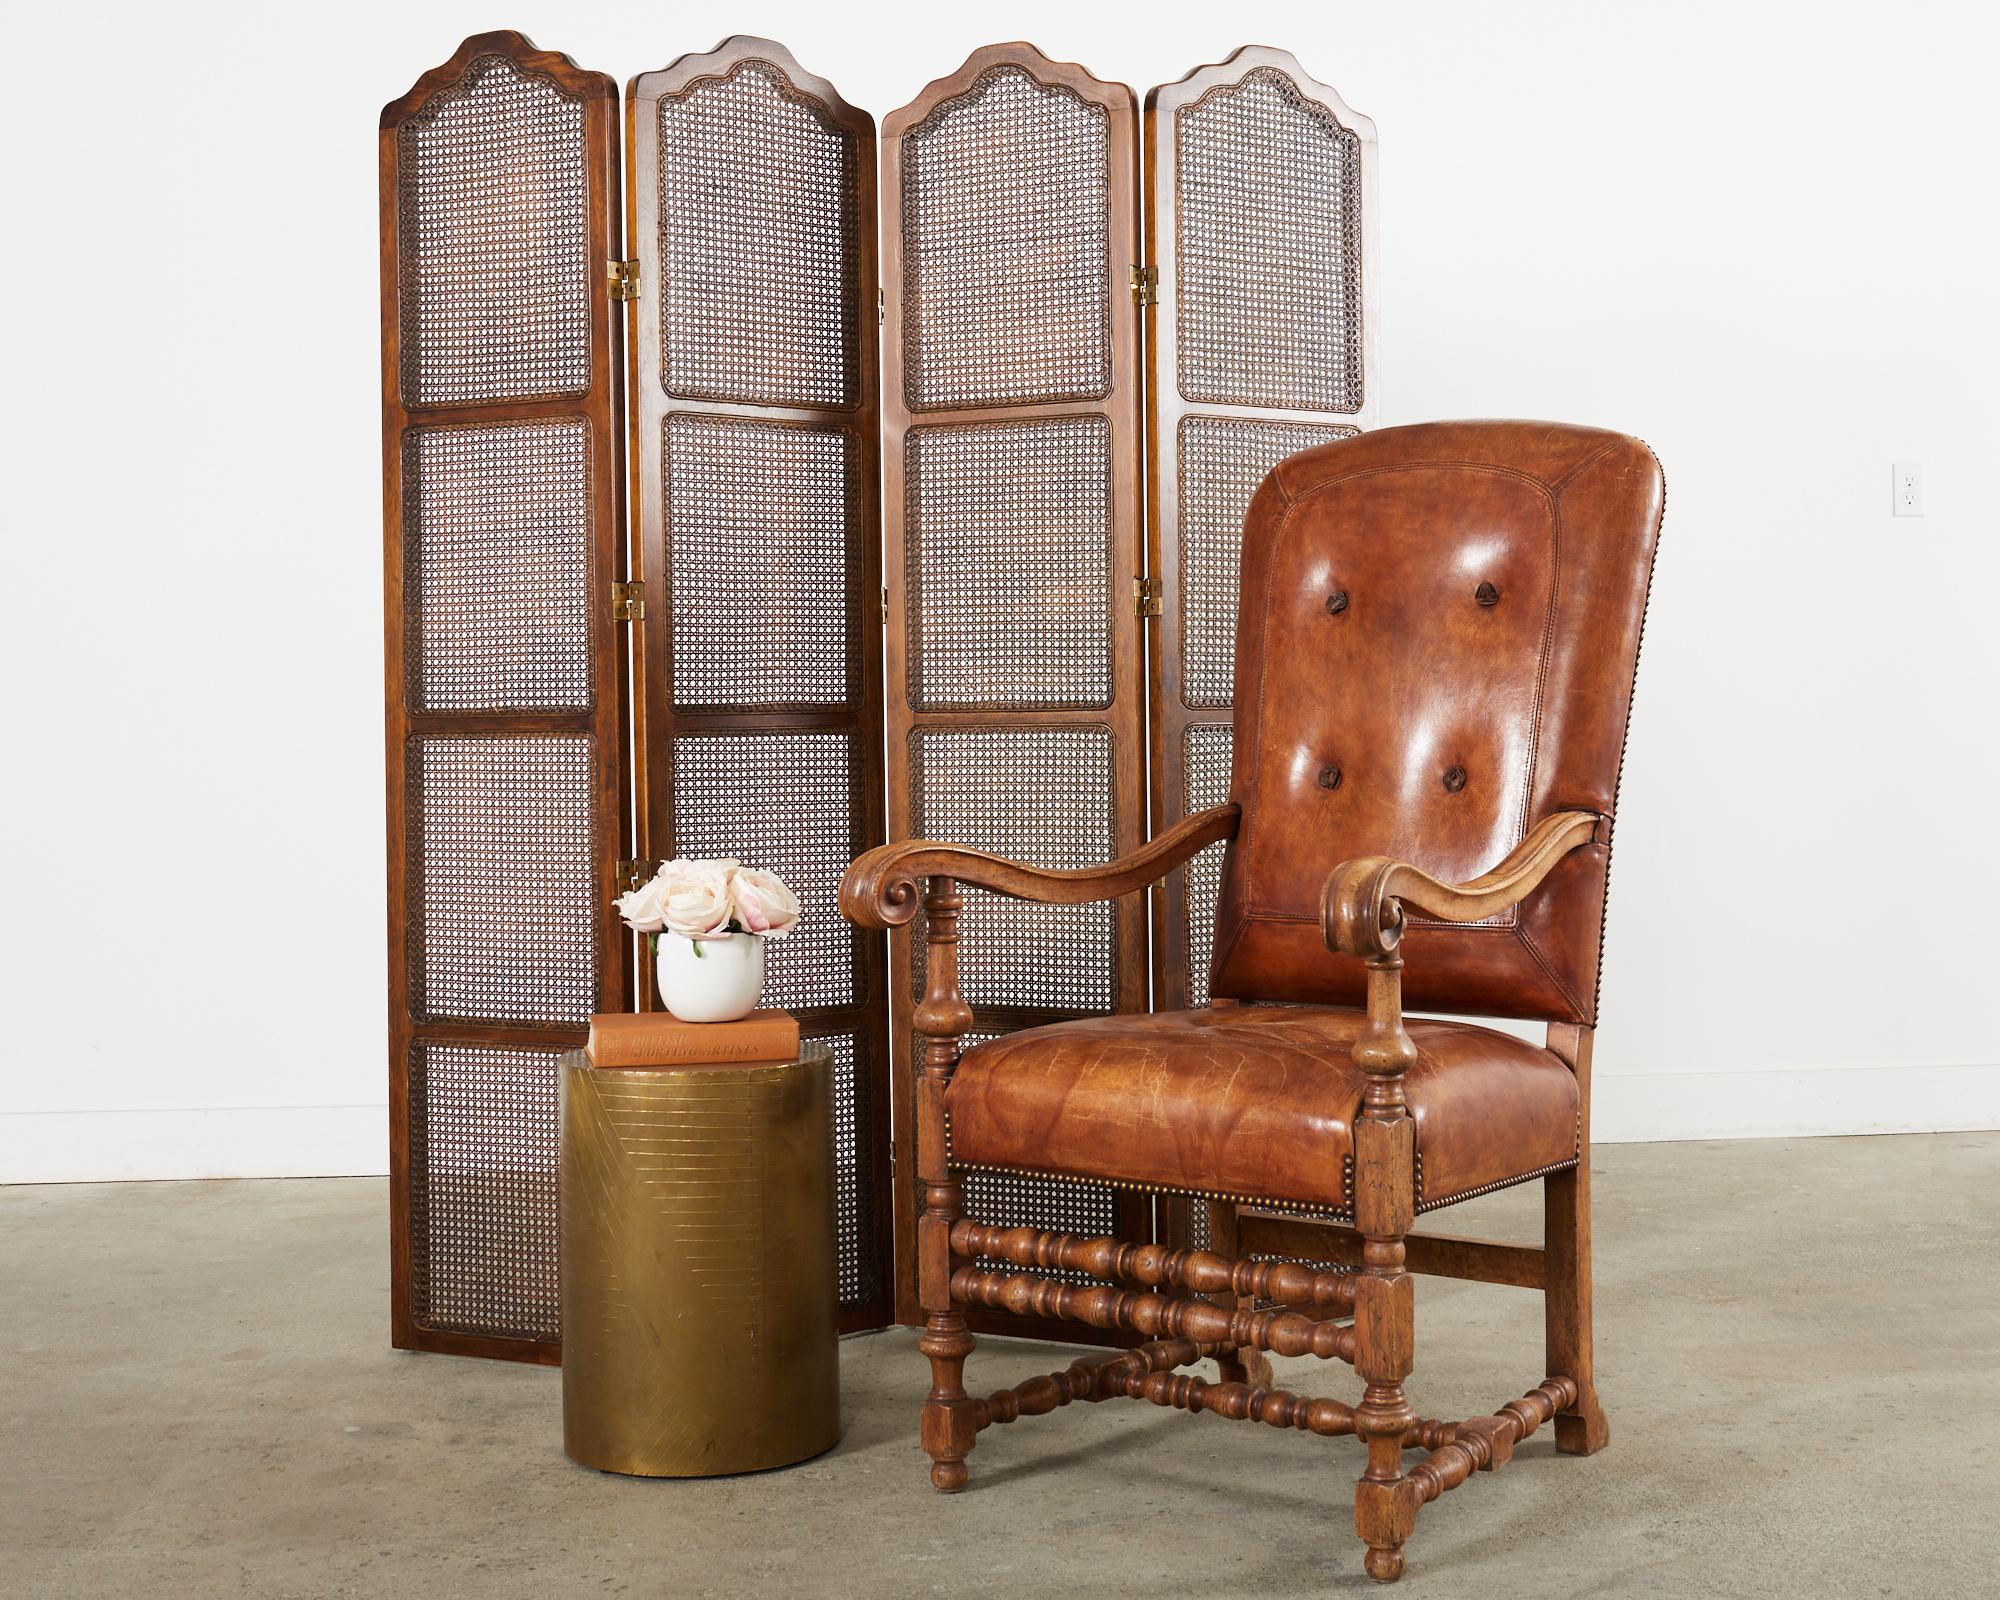 Handsome mid-century modern English four-panel folding screen or room divider crafted from walnut. The screen features a rich walnut frame inset with woven cane windows. Each panel has a stepped shaped top and hinges in either direction with